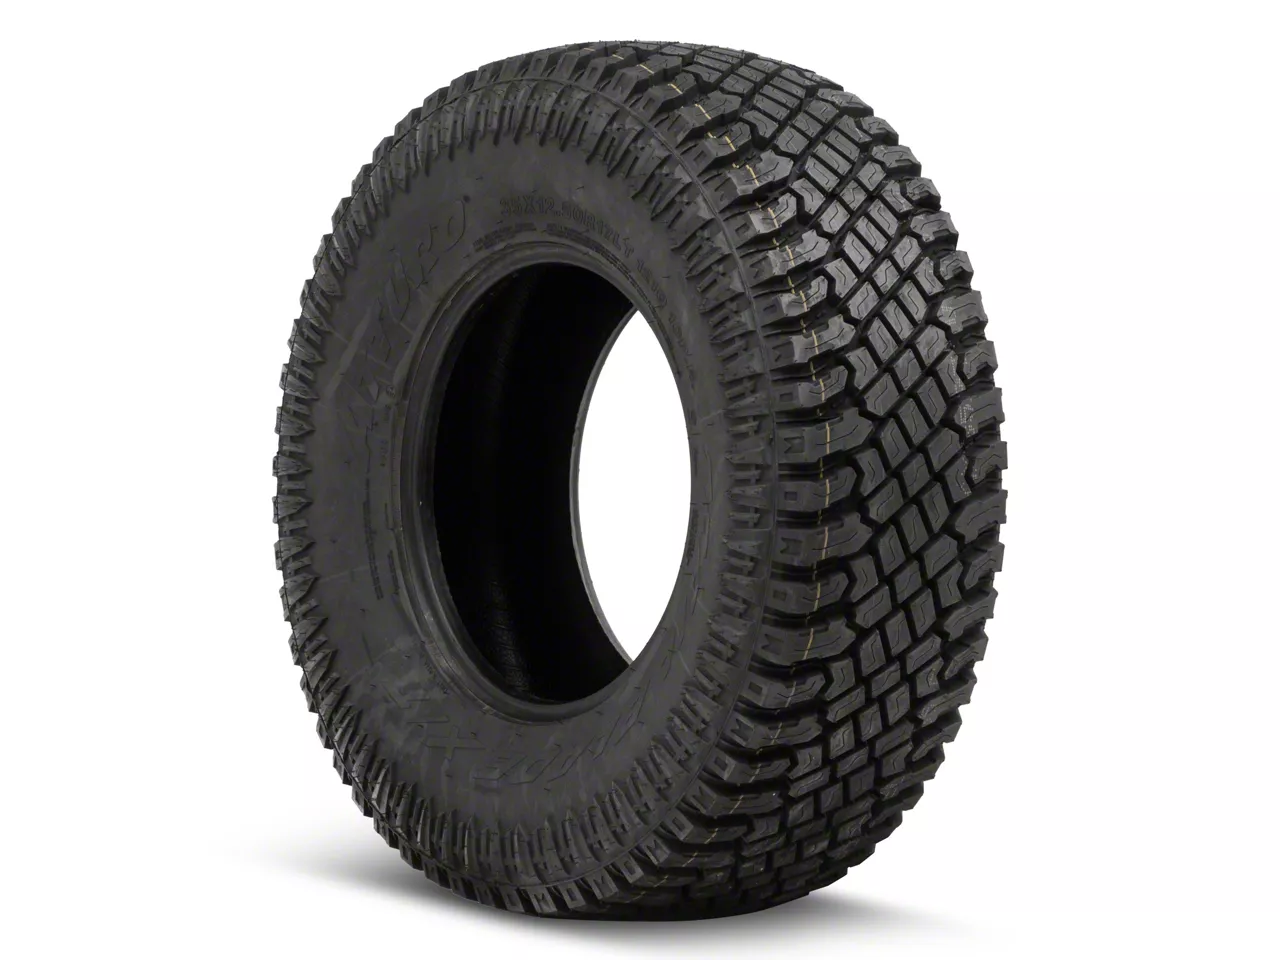 35x12.50R20, Rough Country Overlander M/T